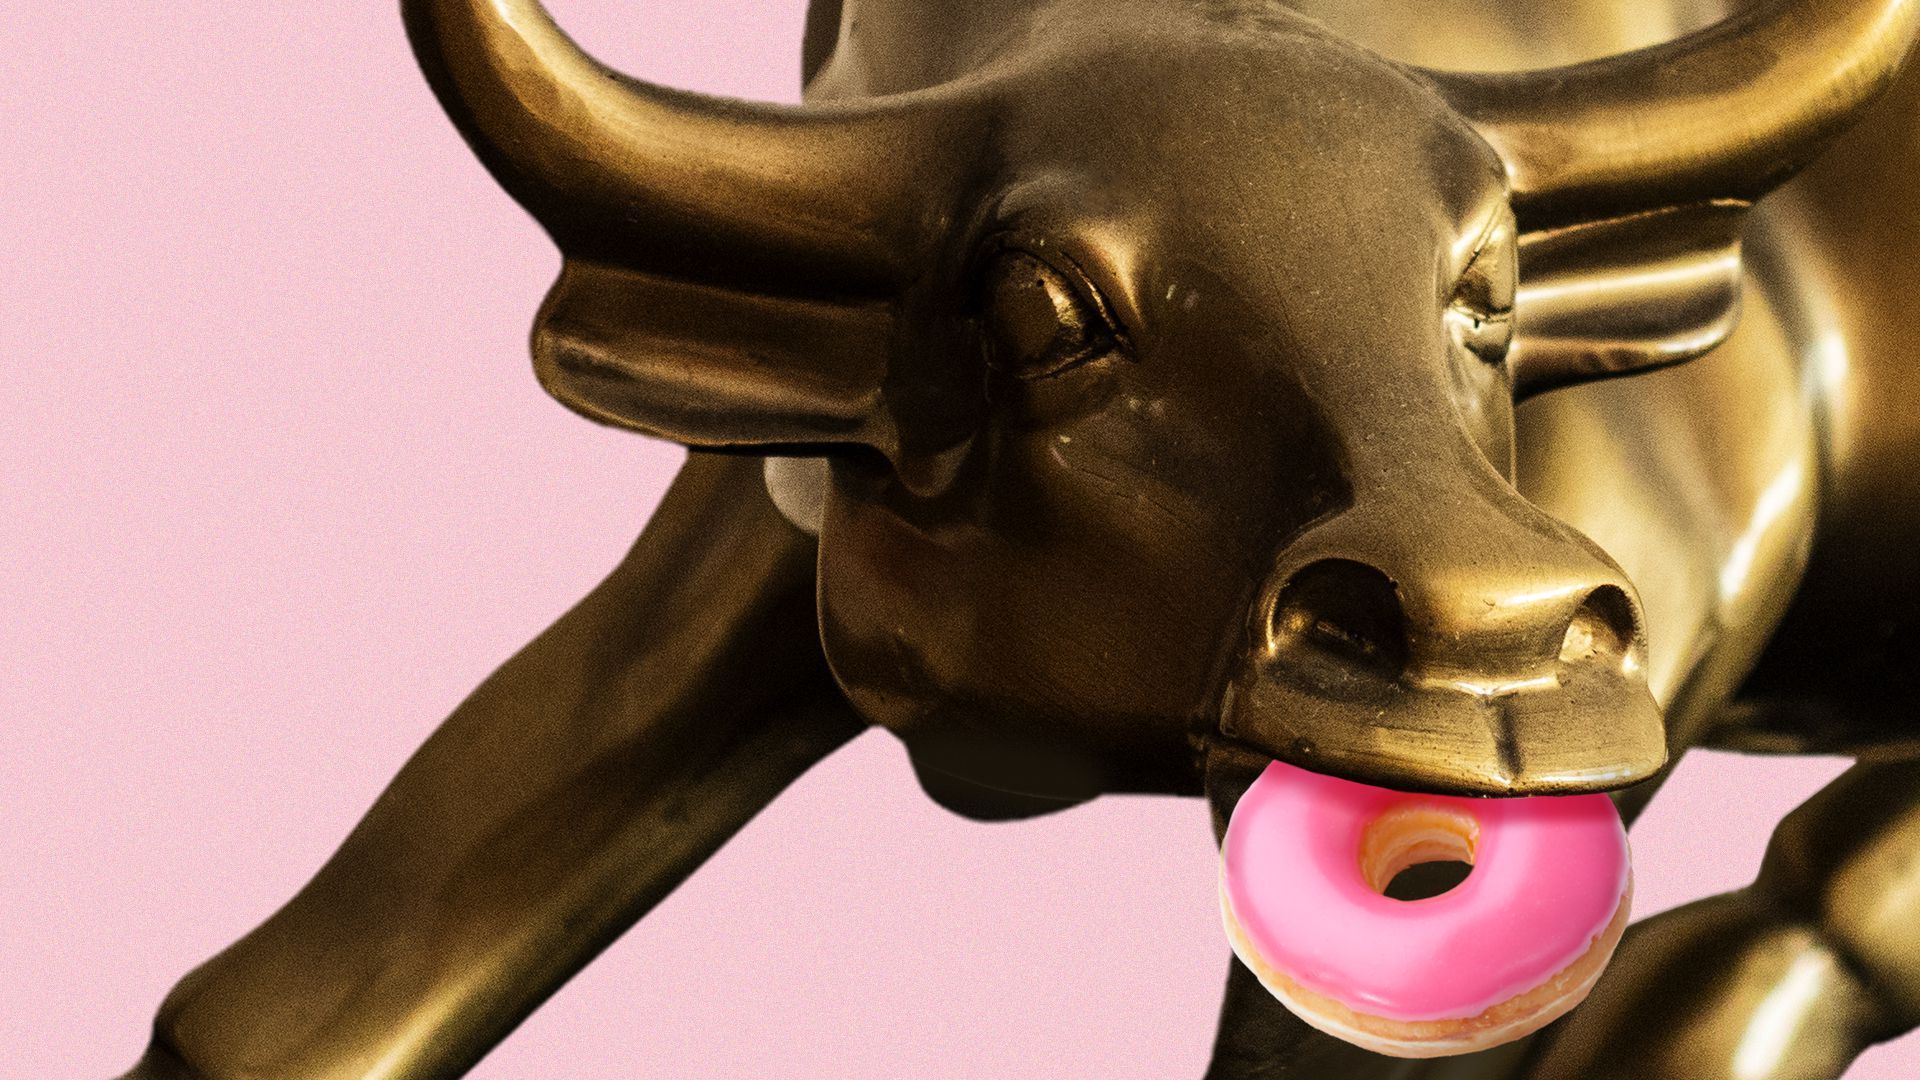 Illustration of the Wall St. bull statue eating a donut.